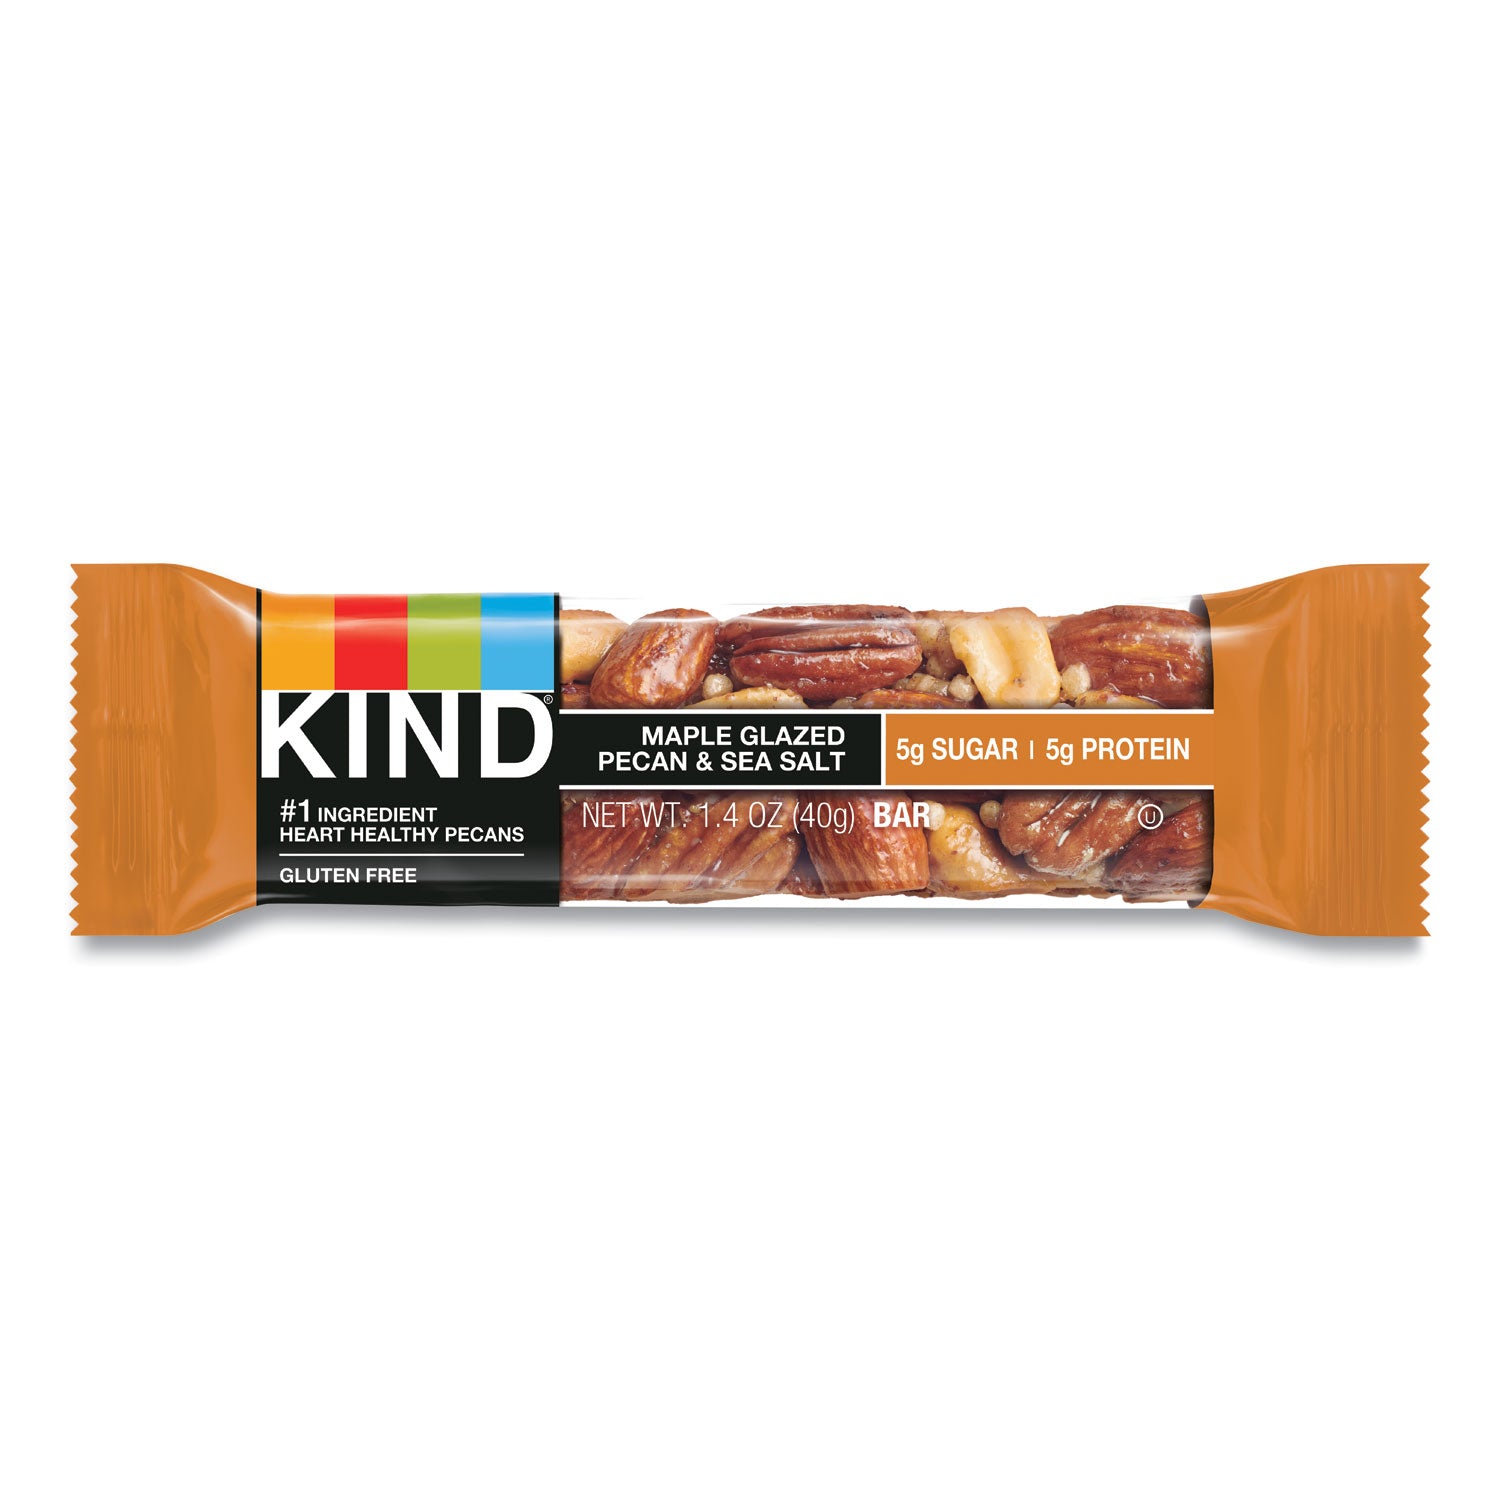 nuts-and-spices-bar-maple-glazed-pecan-and-sea-salt-14-oz-bar-12-box_knd17930 - 2